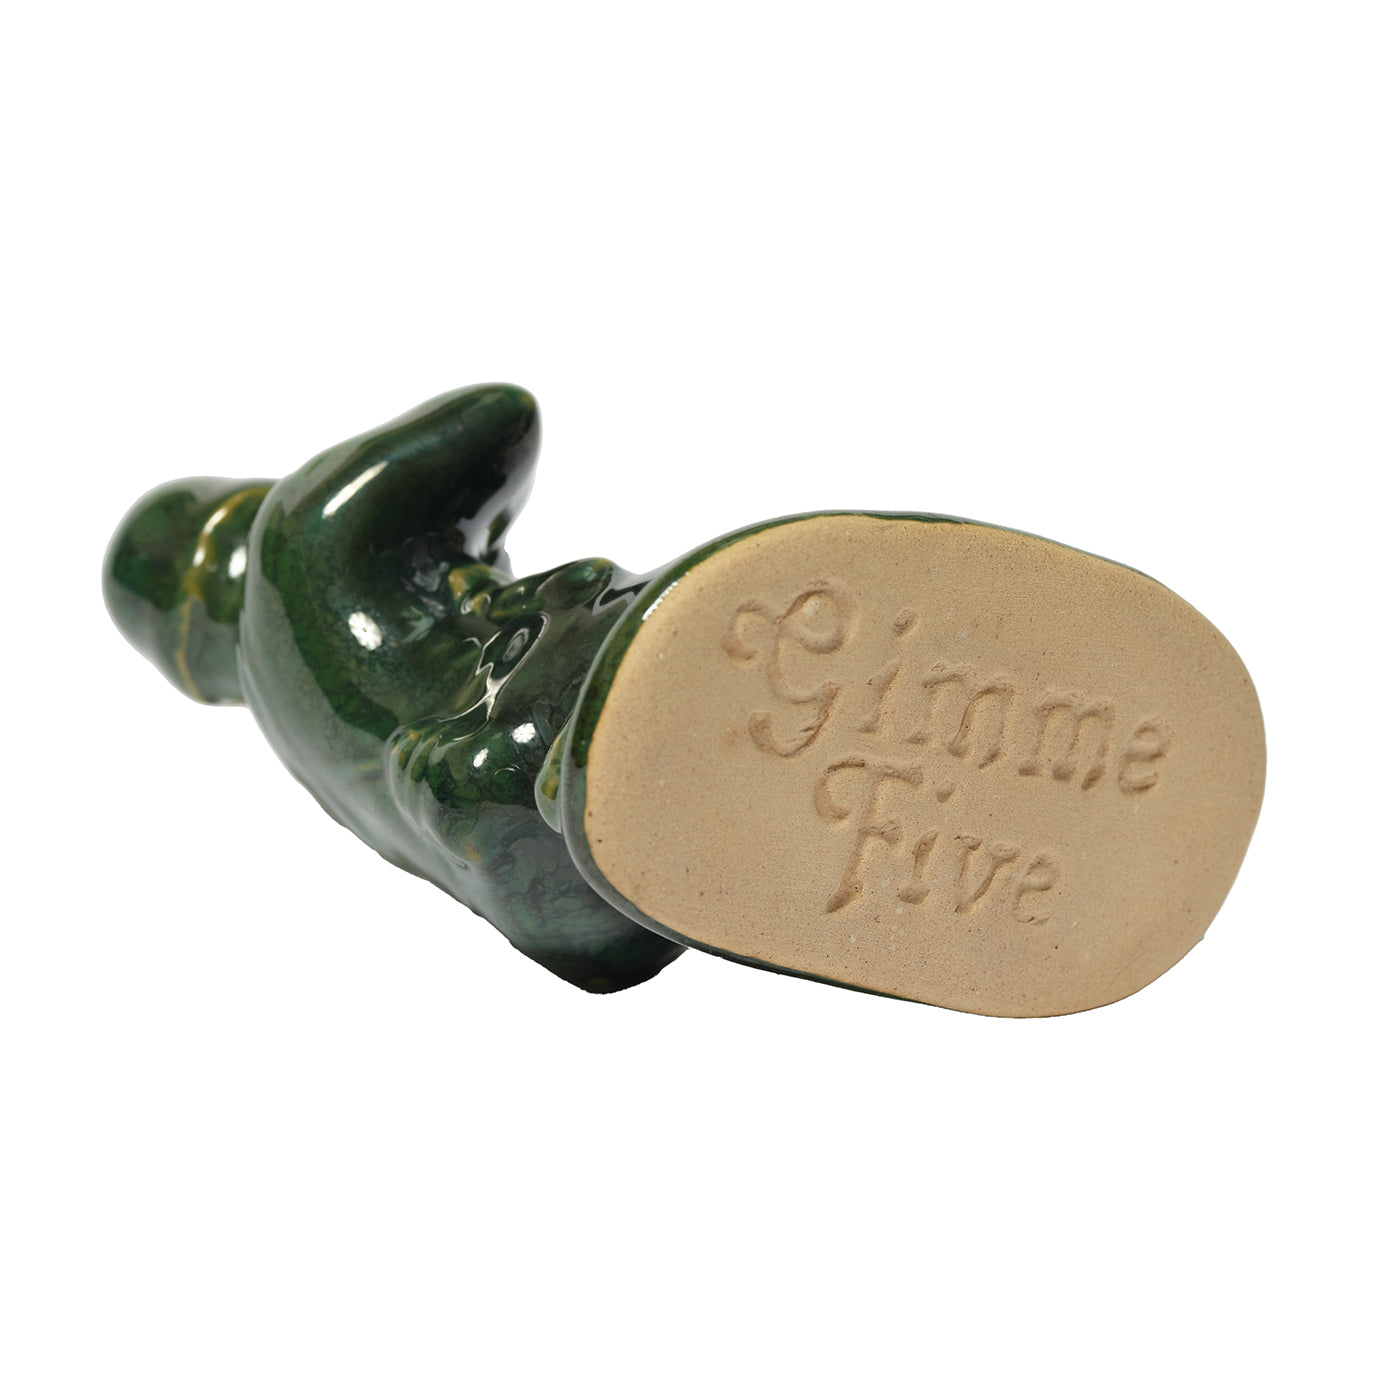 Gimme Five Soldier Incense Burner and Kuumba 